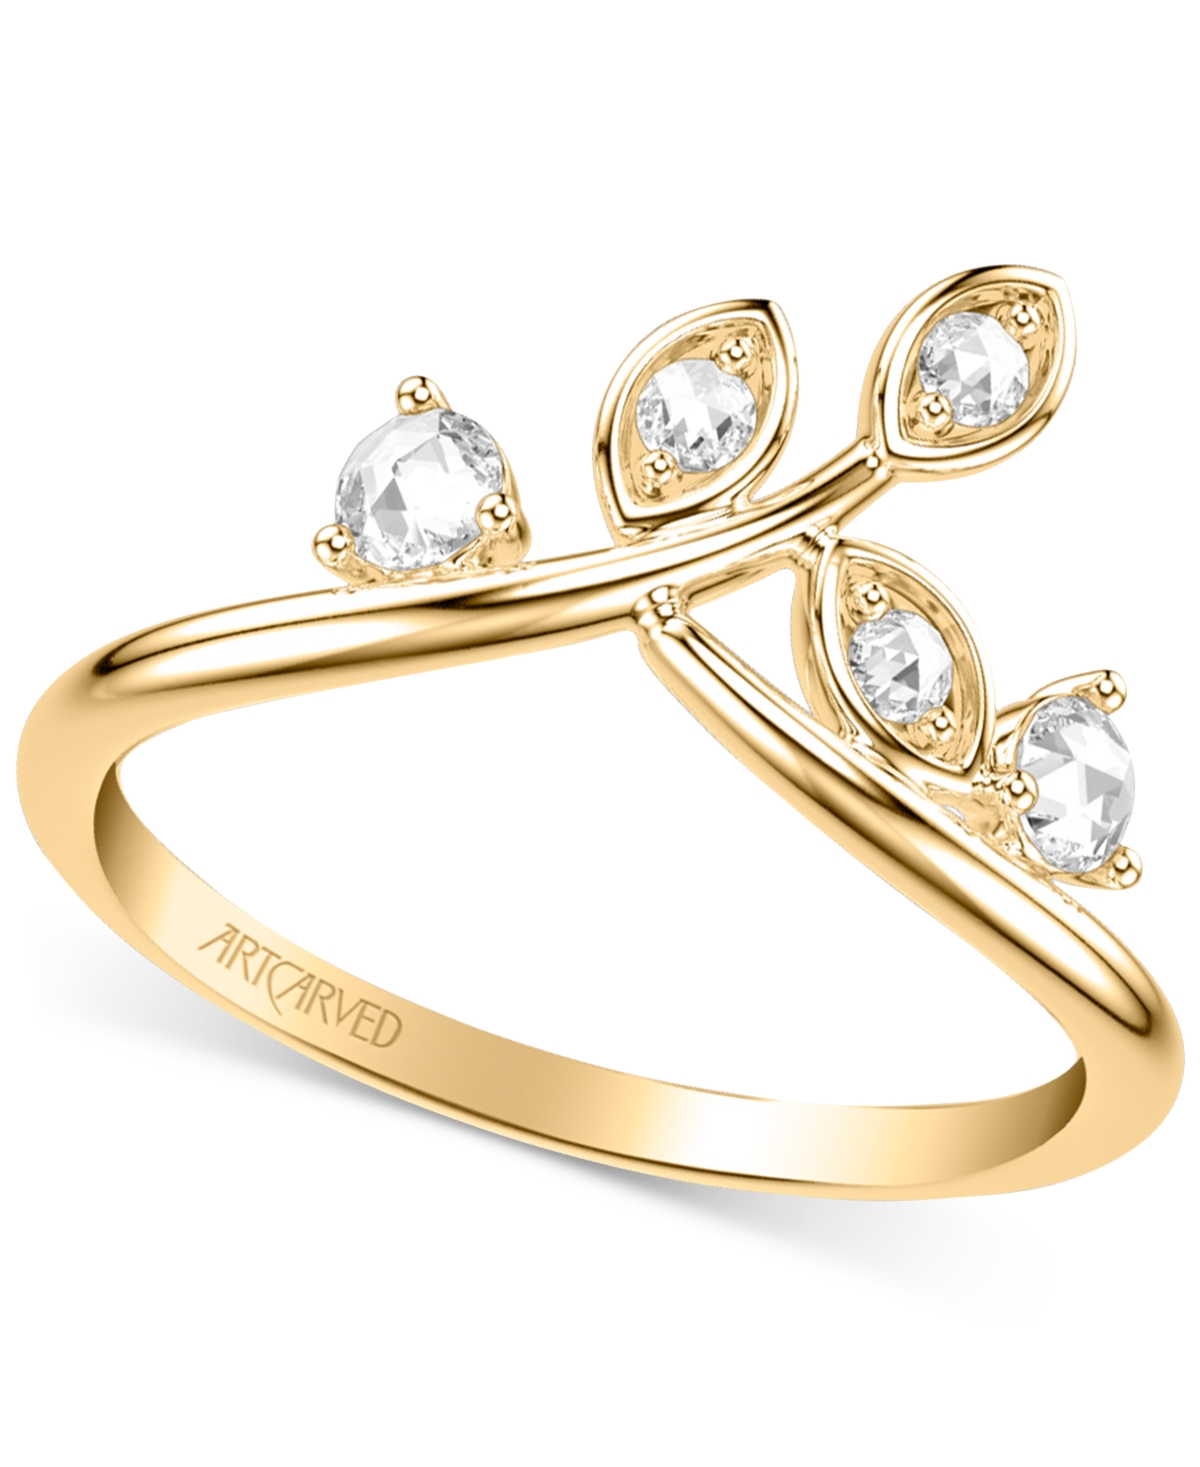 Artcarved Art Carved Diamond Rose-Cut Leaf Wedding Band (1/5 ct. t.w.) in 14k White, Yellow or Rose Gold